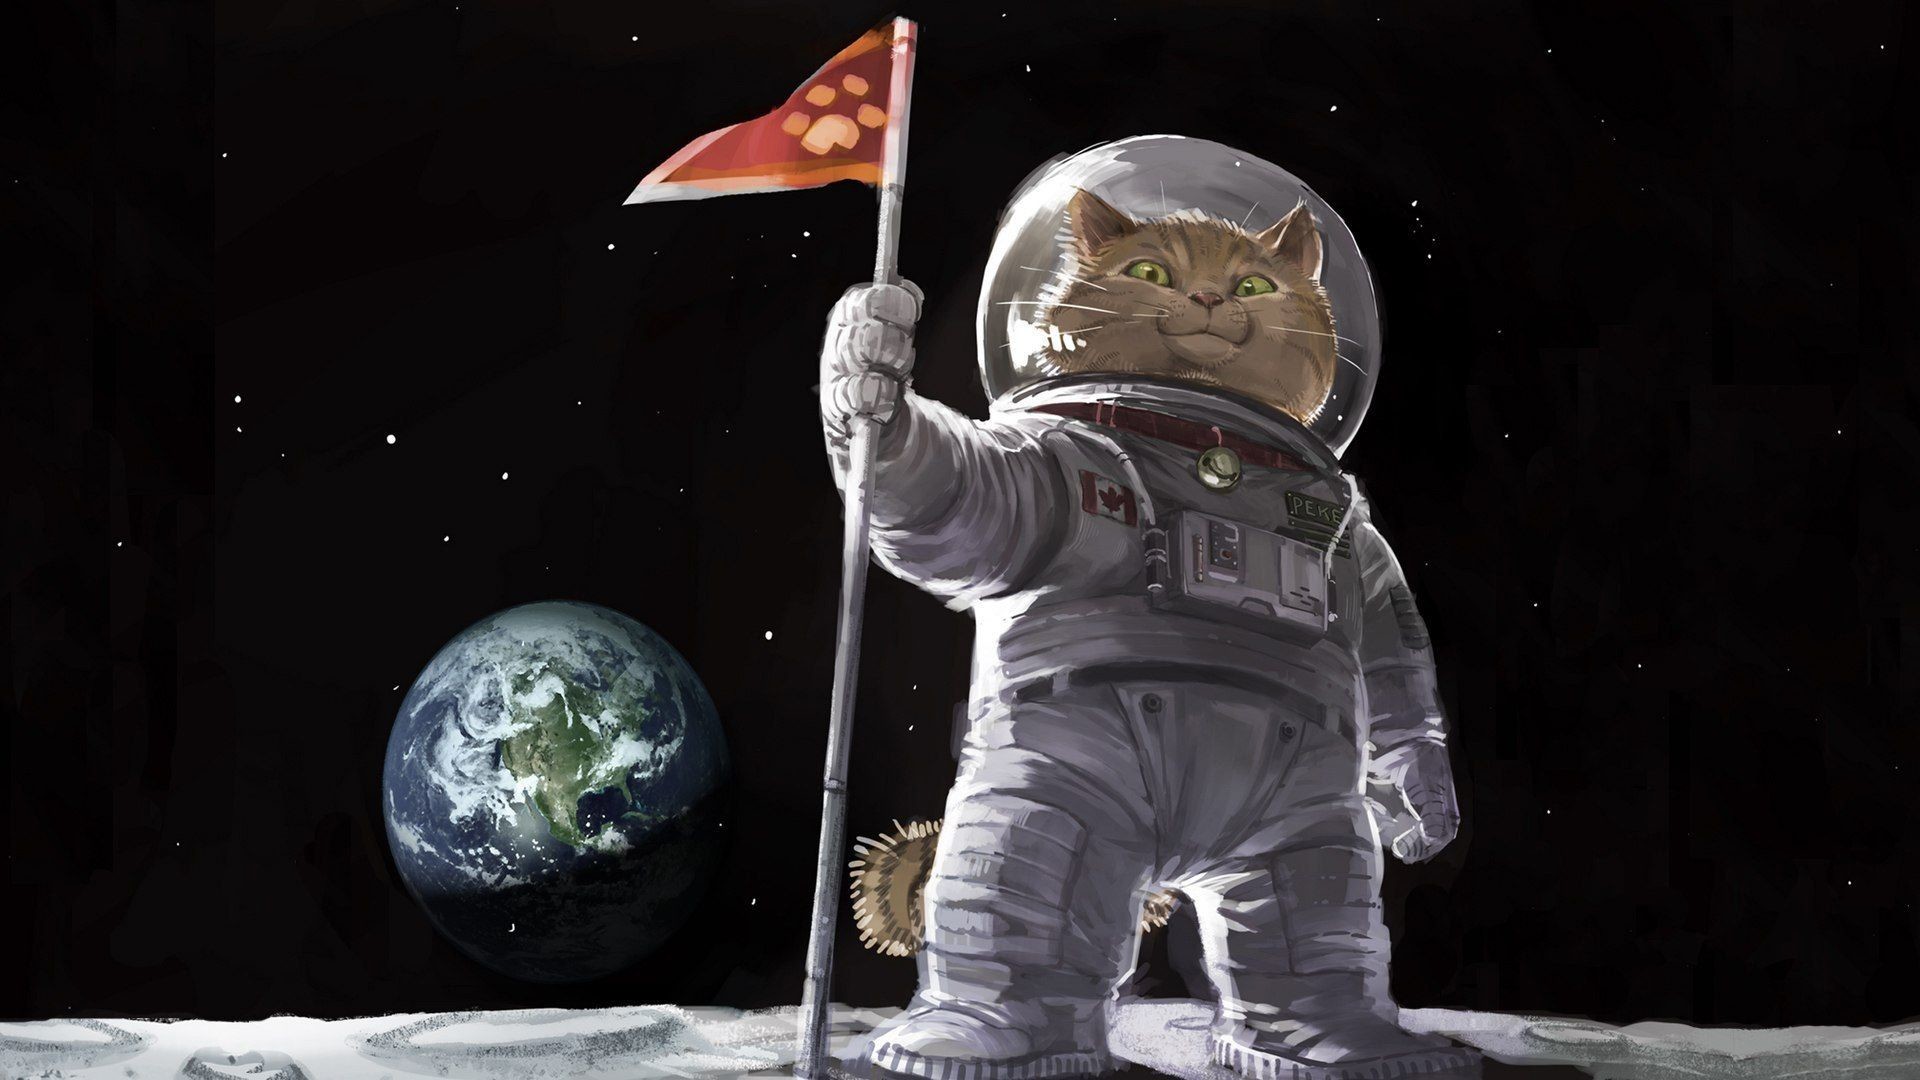 1920x1080 Astronaut On Moon with Cat (page 5) - Pics about space